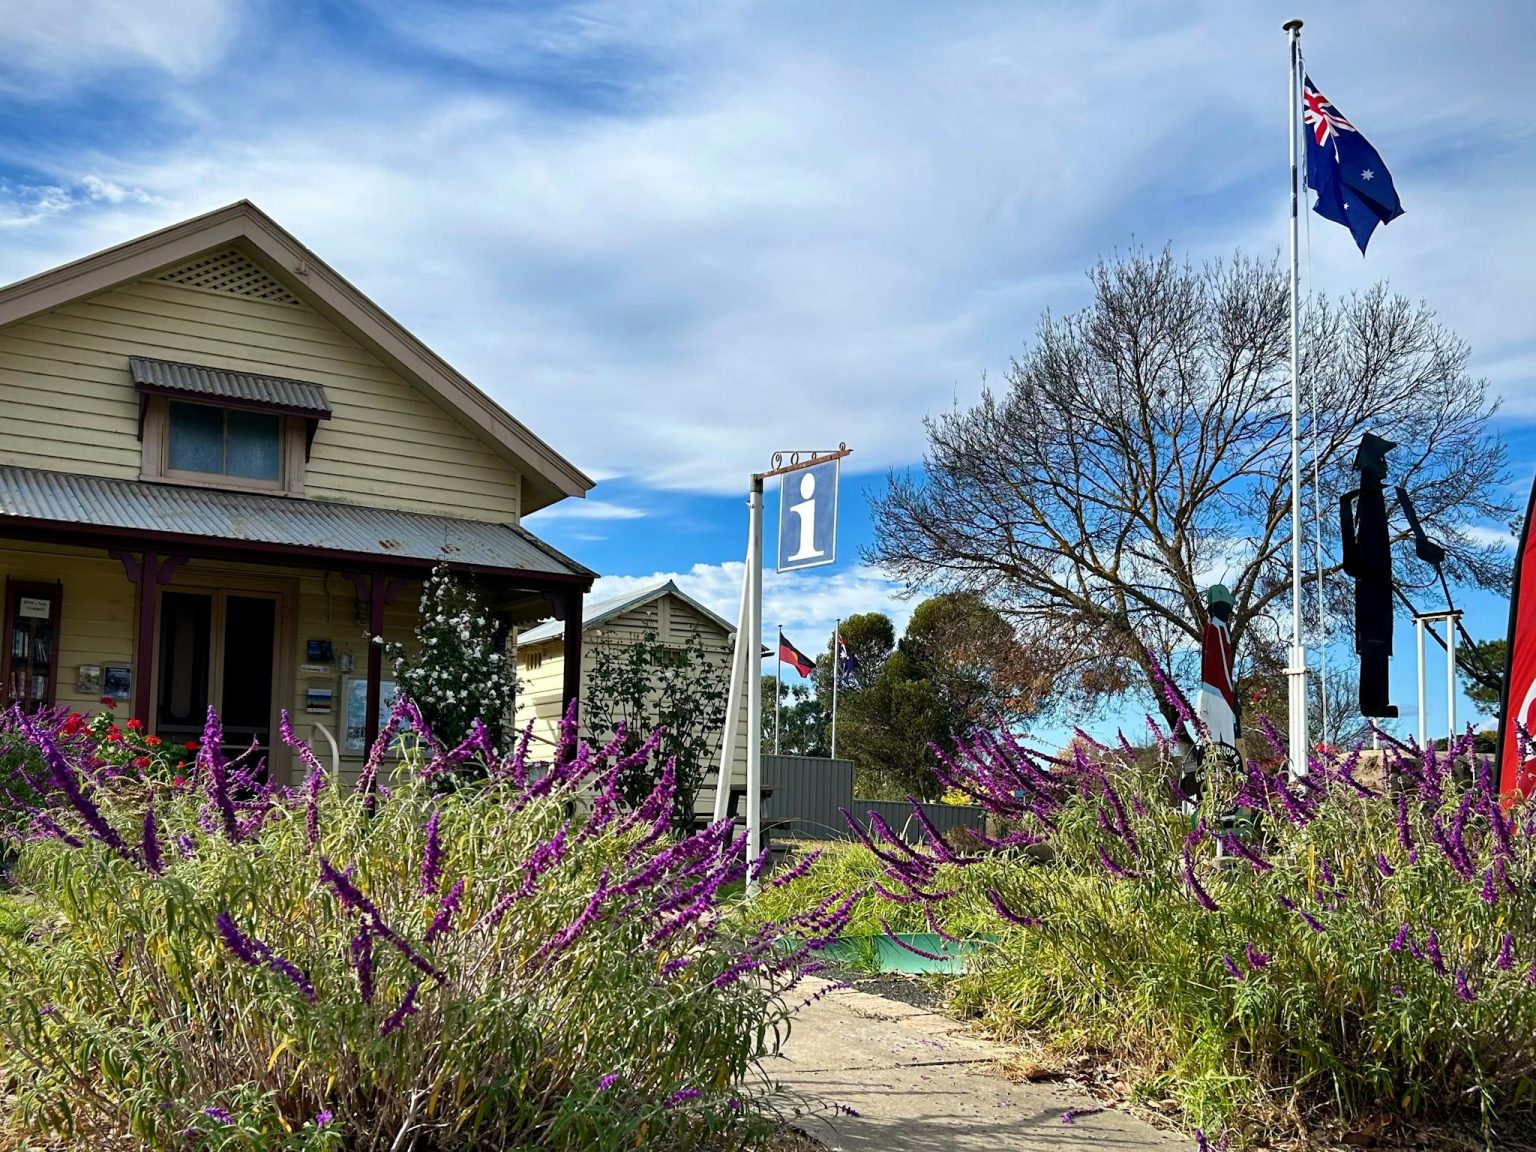 Edenhope Courthouse and Visitor Information Centre